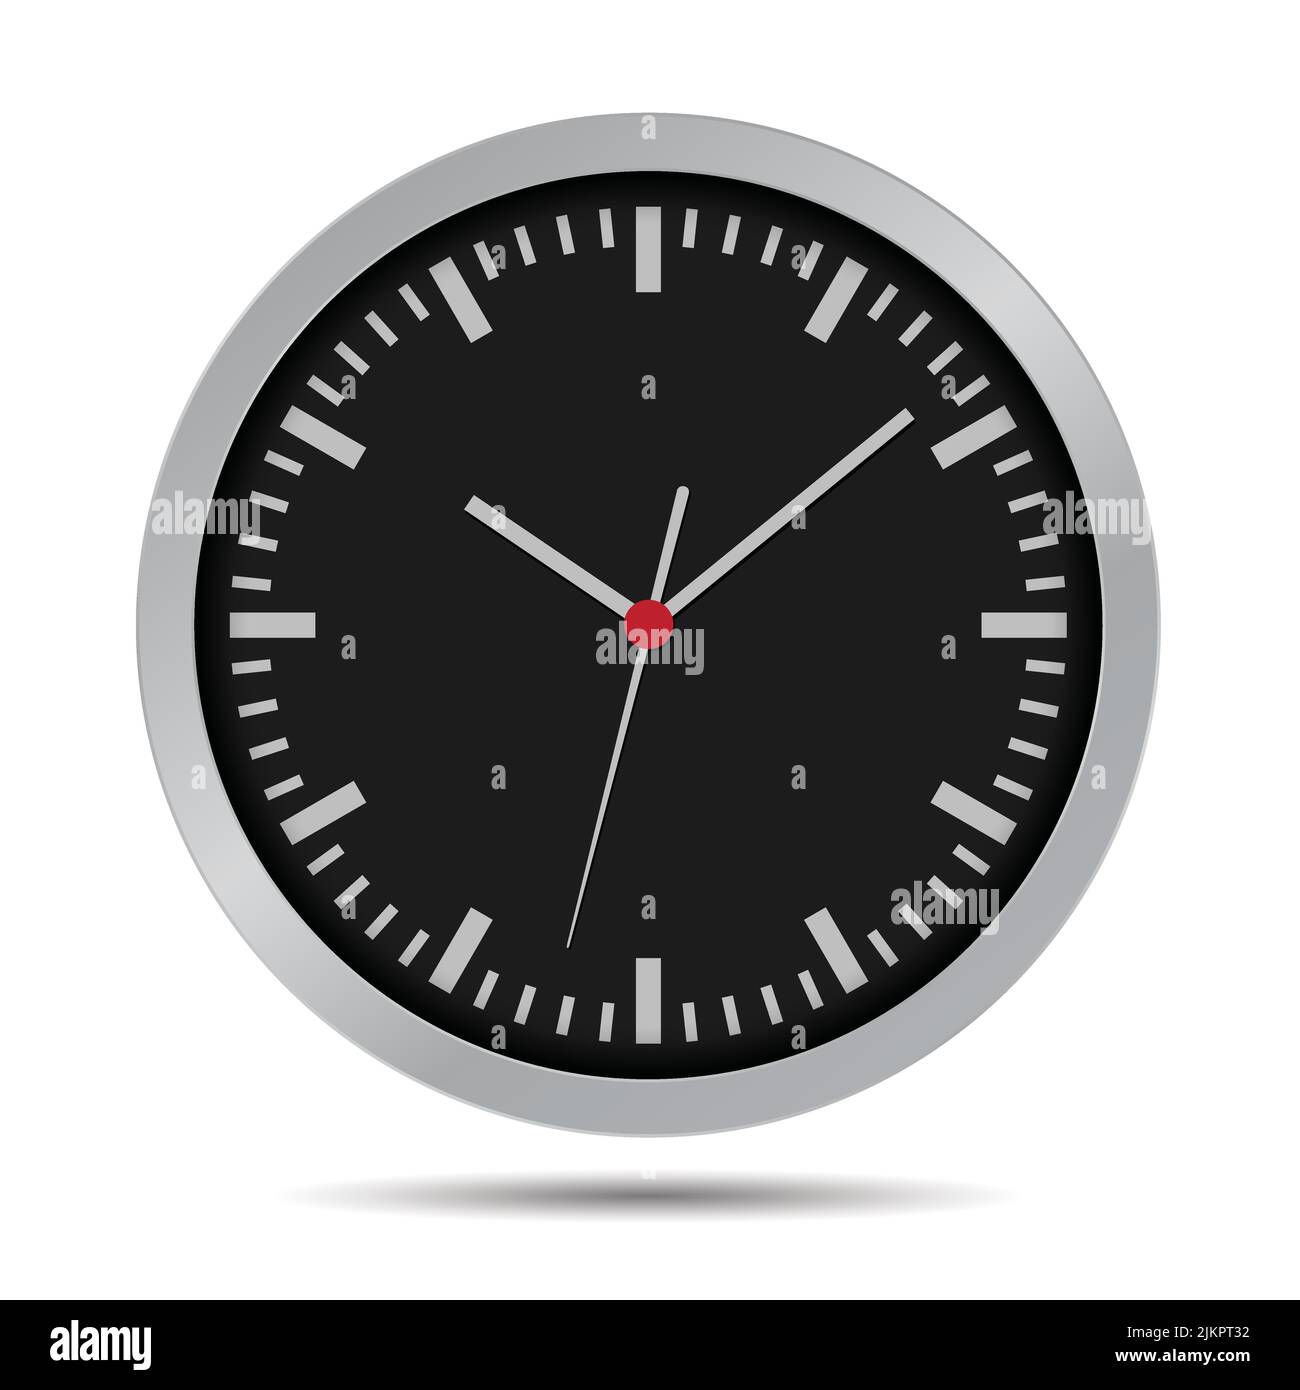 Flat design illustration of a dark wall clock. Circular clock face with minute, hour and second hand - vector Stock Vector